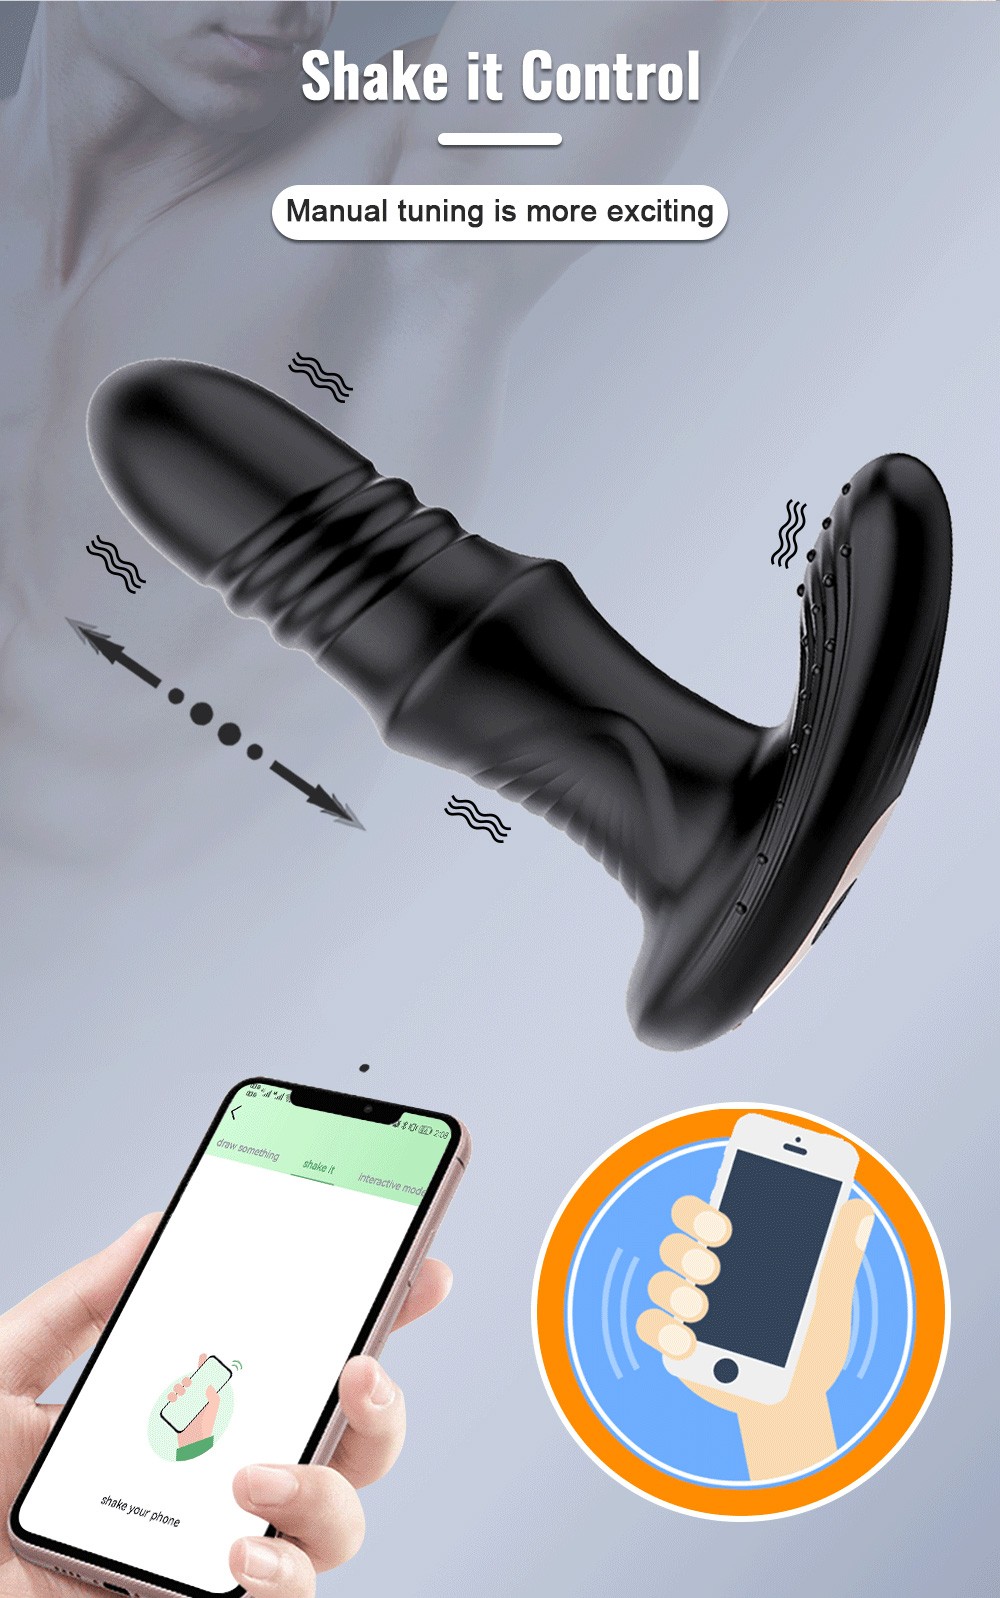 Remote Controlled Thrusting Vibrating Prostate Massagers sssss